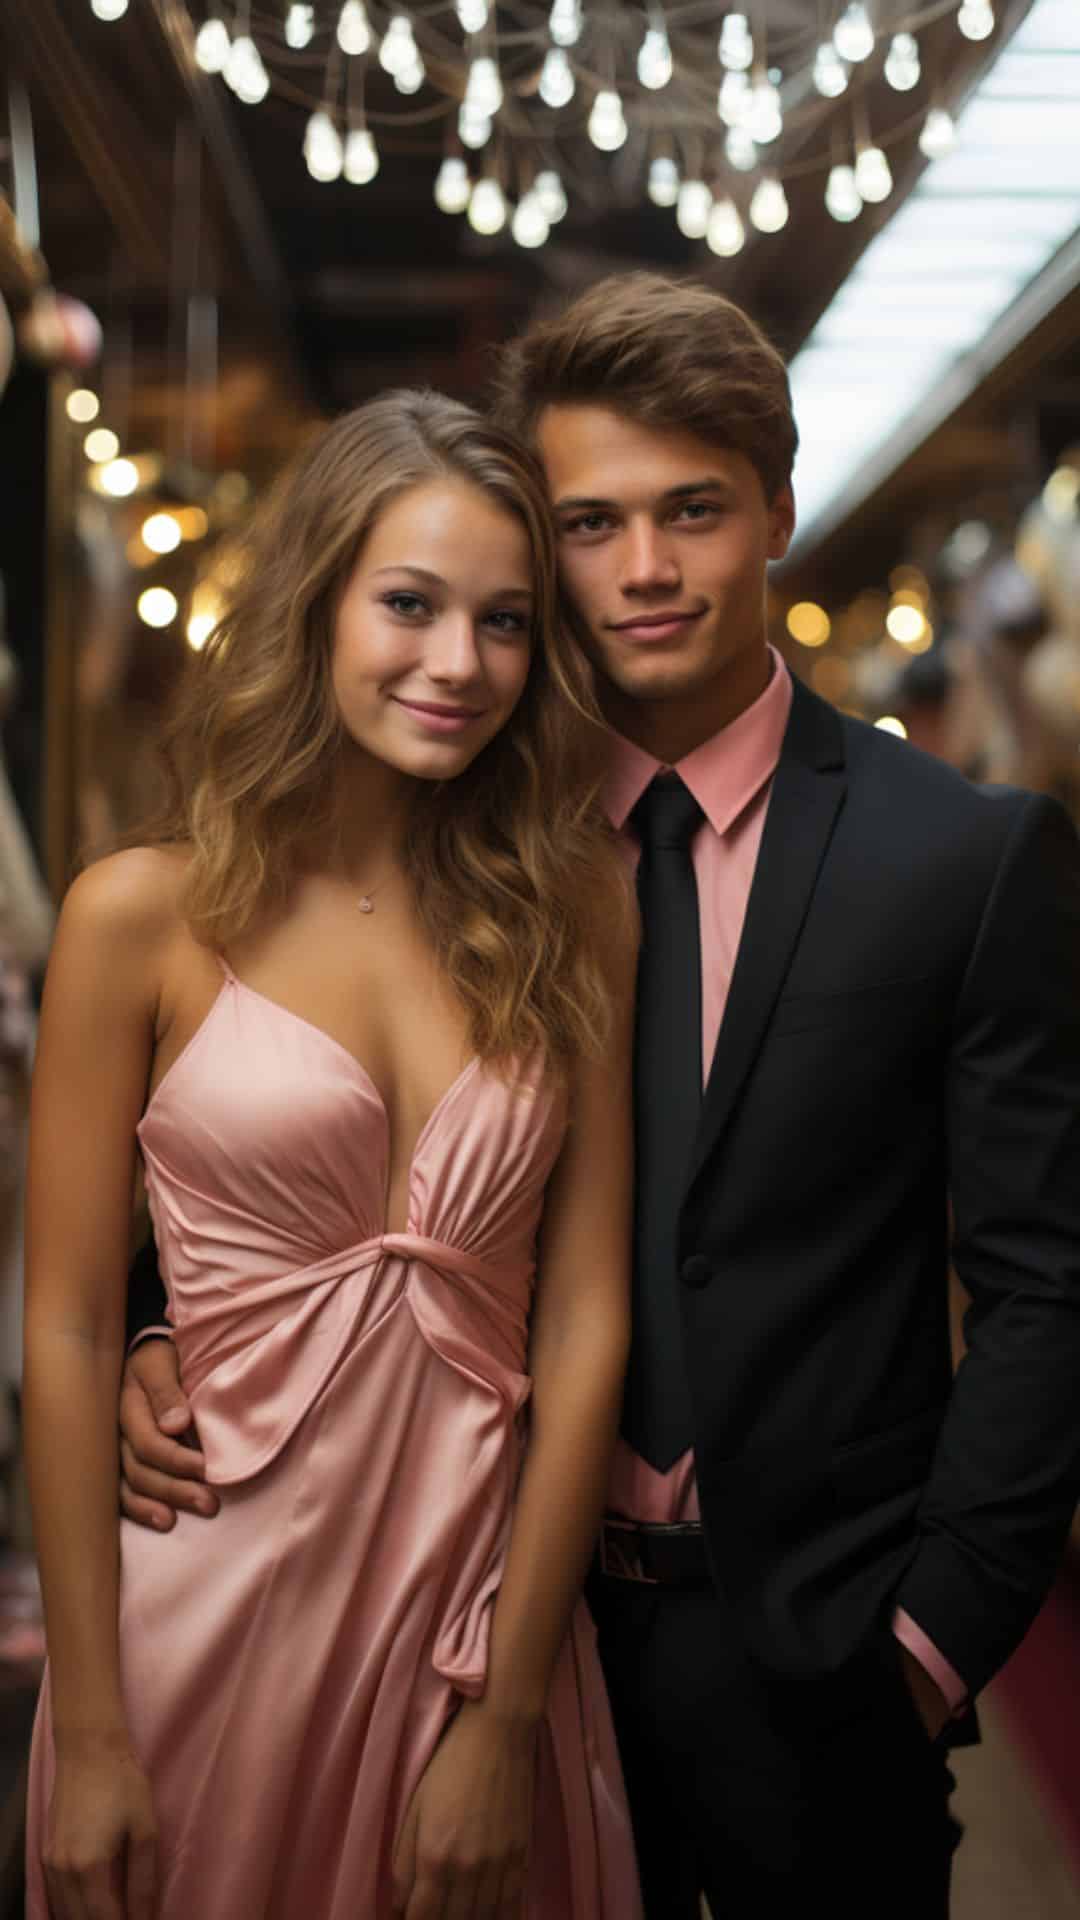 teens dressed for homecoming and prom